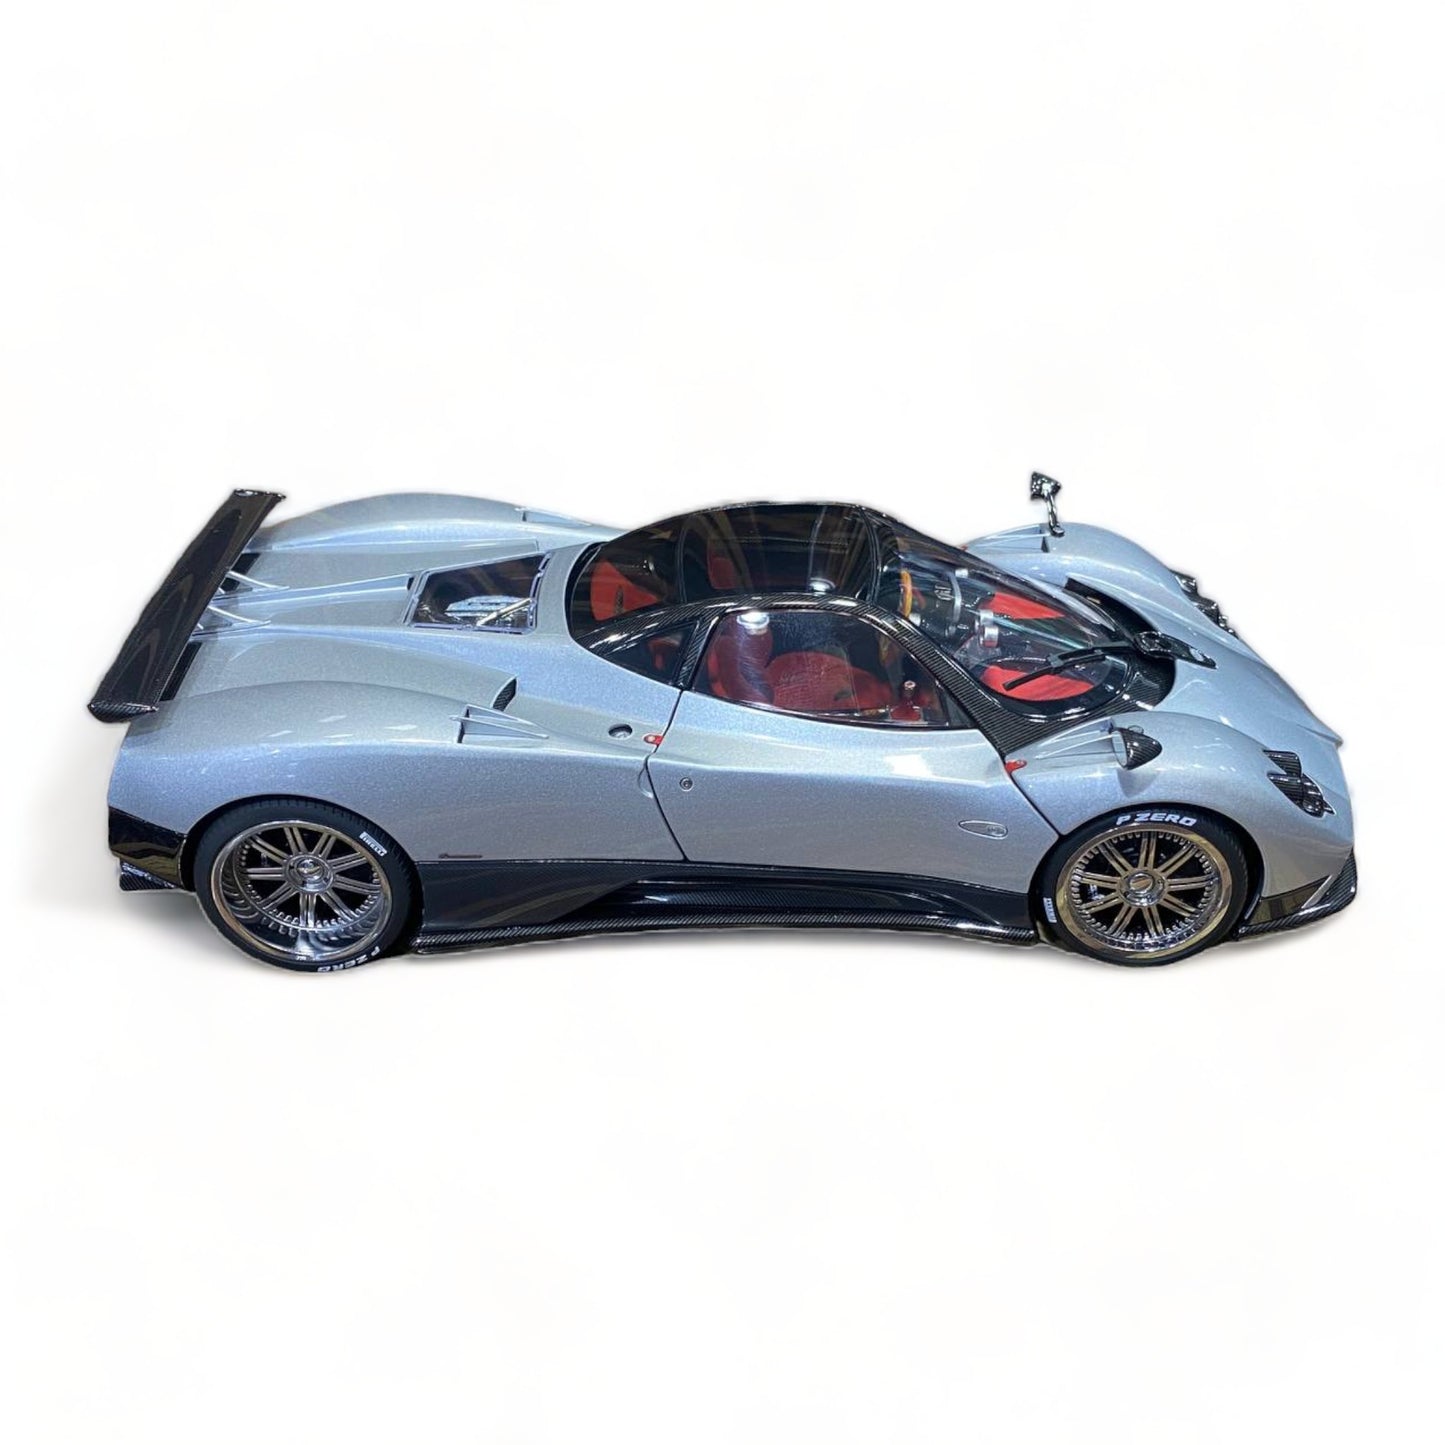 Almost Real Pagani Zonda F 1/18 Diecast - Full Opening, Silver, Limited Edition|Sold in Dturman.com Dubai UAE.